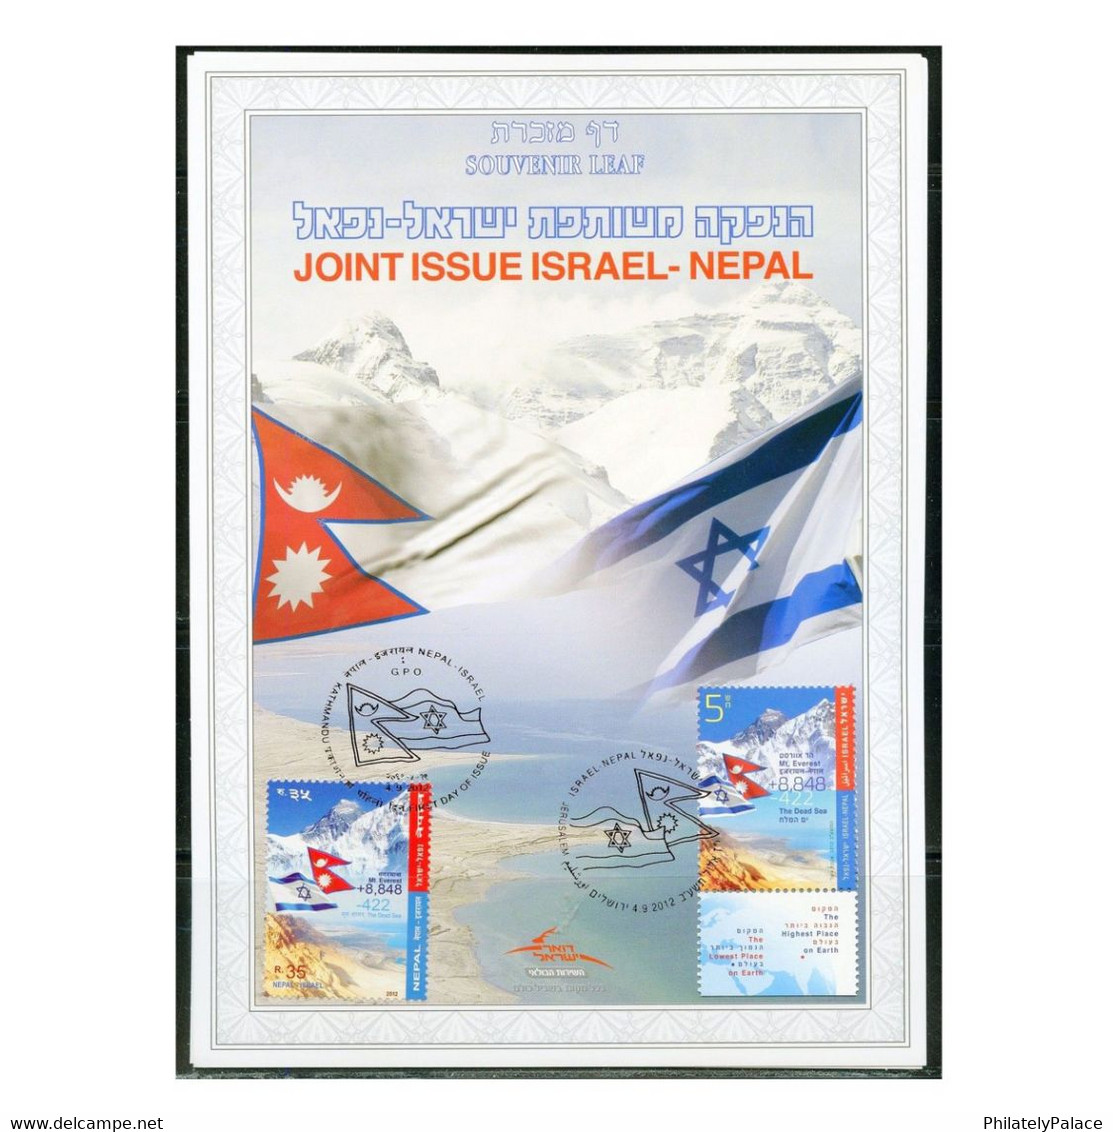 Israel 2012  Israel – Nepal Joint Issue Mountain Souvenir Leaf   (**) - Covers & Documents